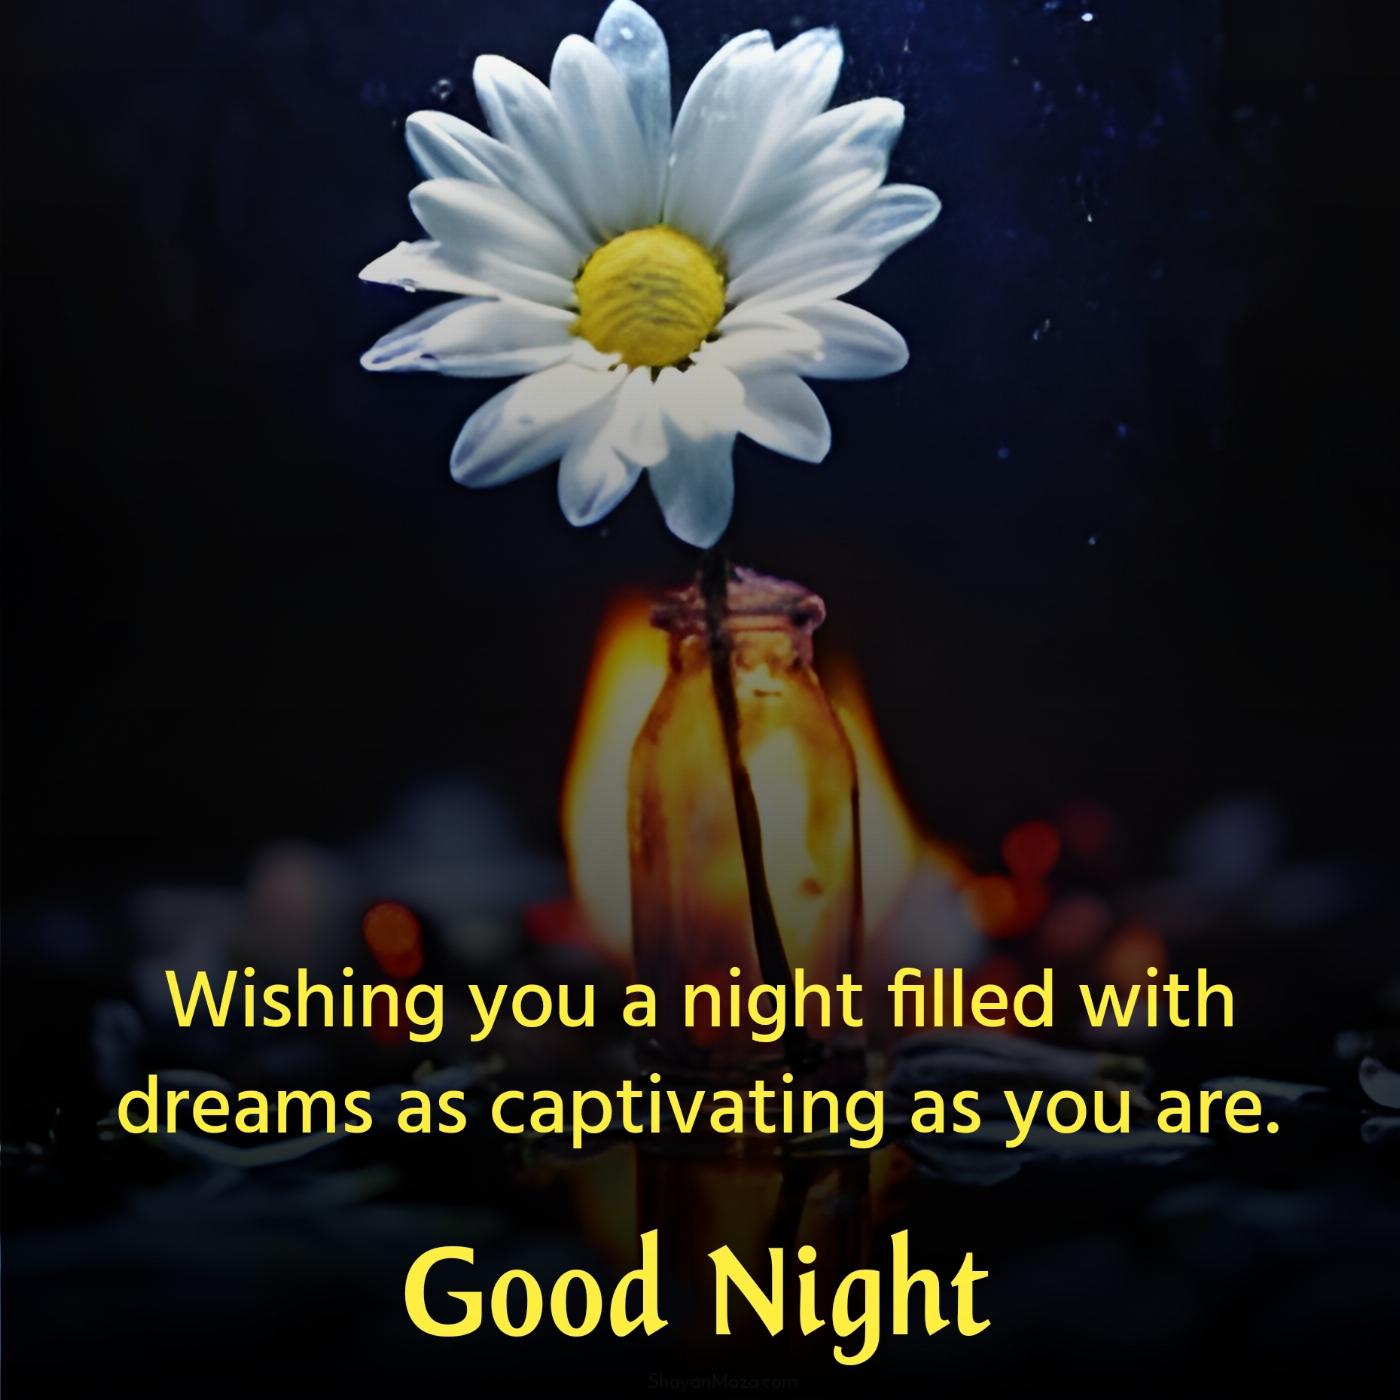 Wishing you a night filled with dreams as captivating as you are